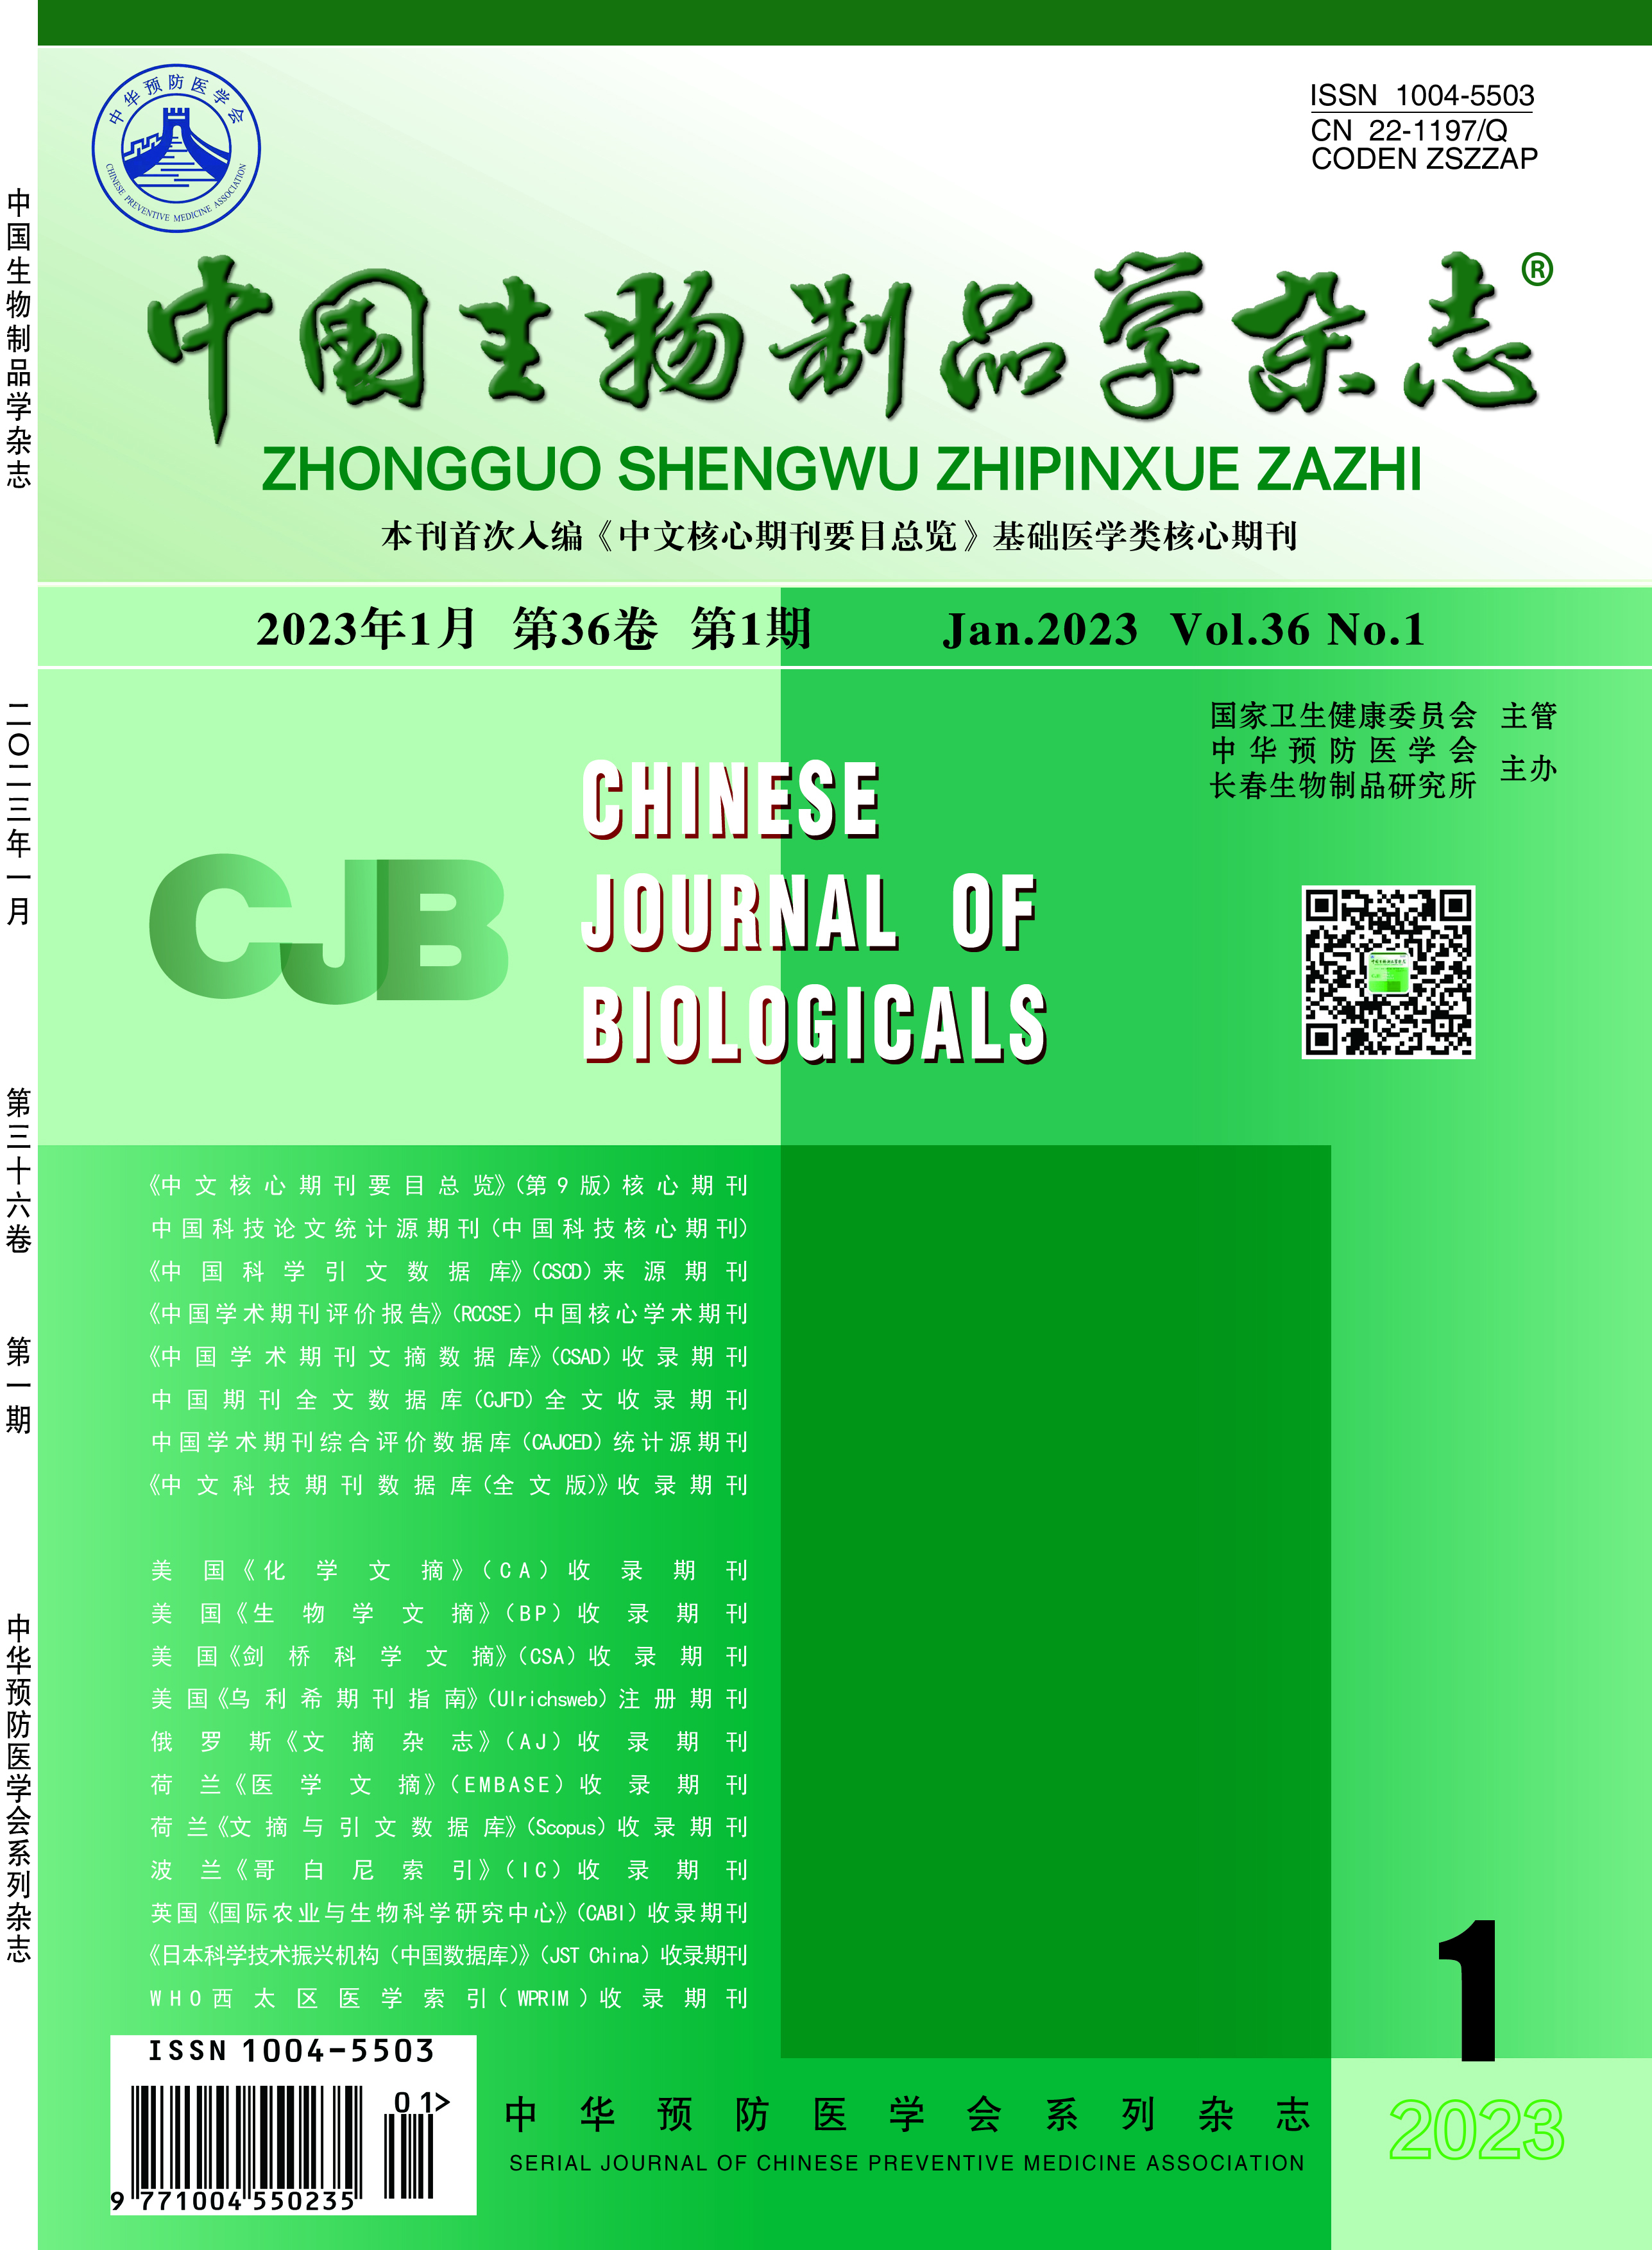 Chinese Journal of Biologicals